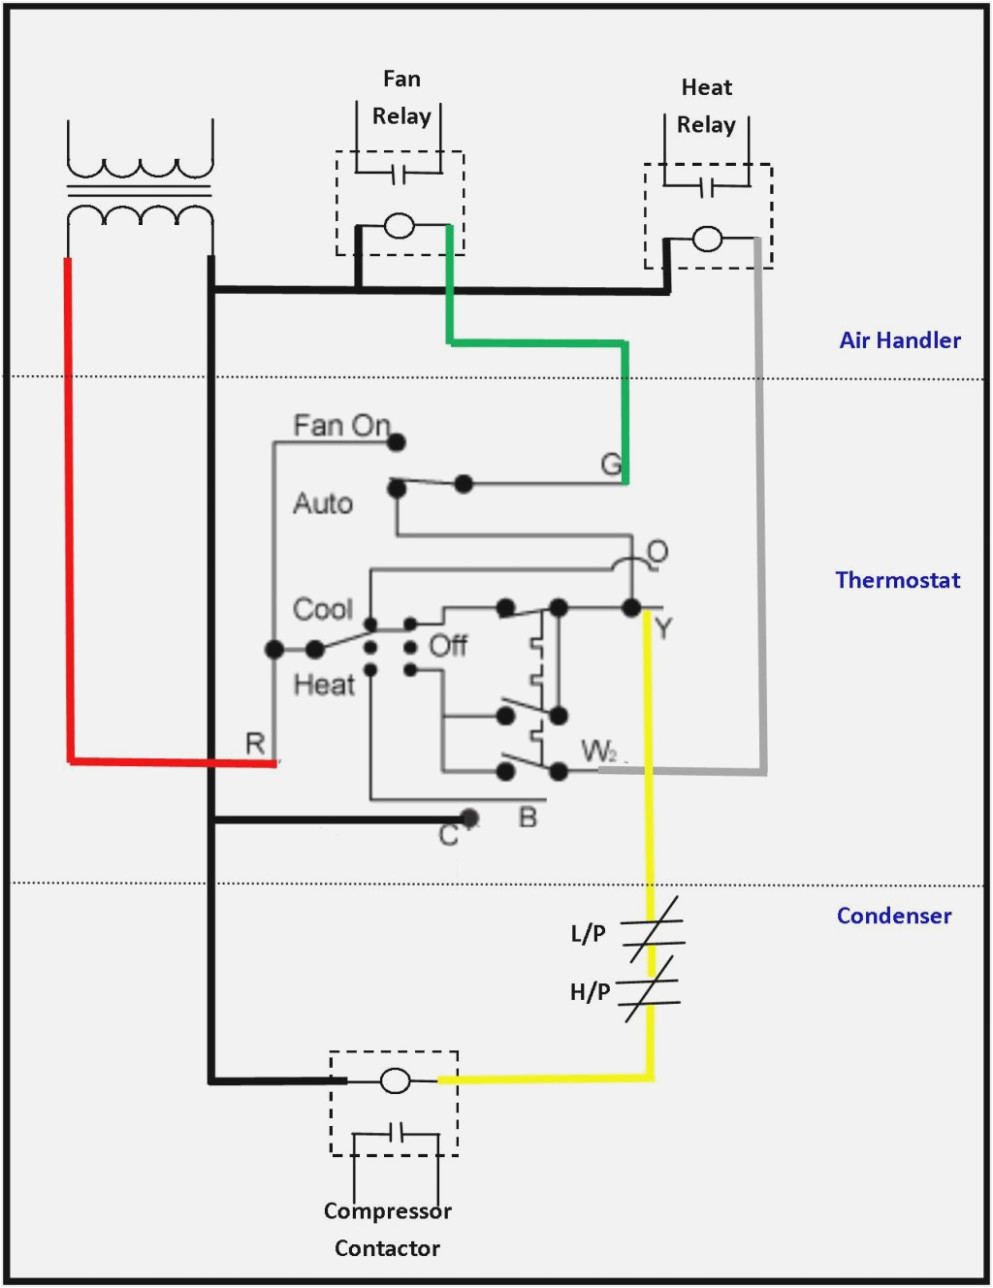 belimo wiring diagram wiring diagram review mix belimo wiring diagram wiring diagram list belimo lr24a sr